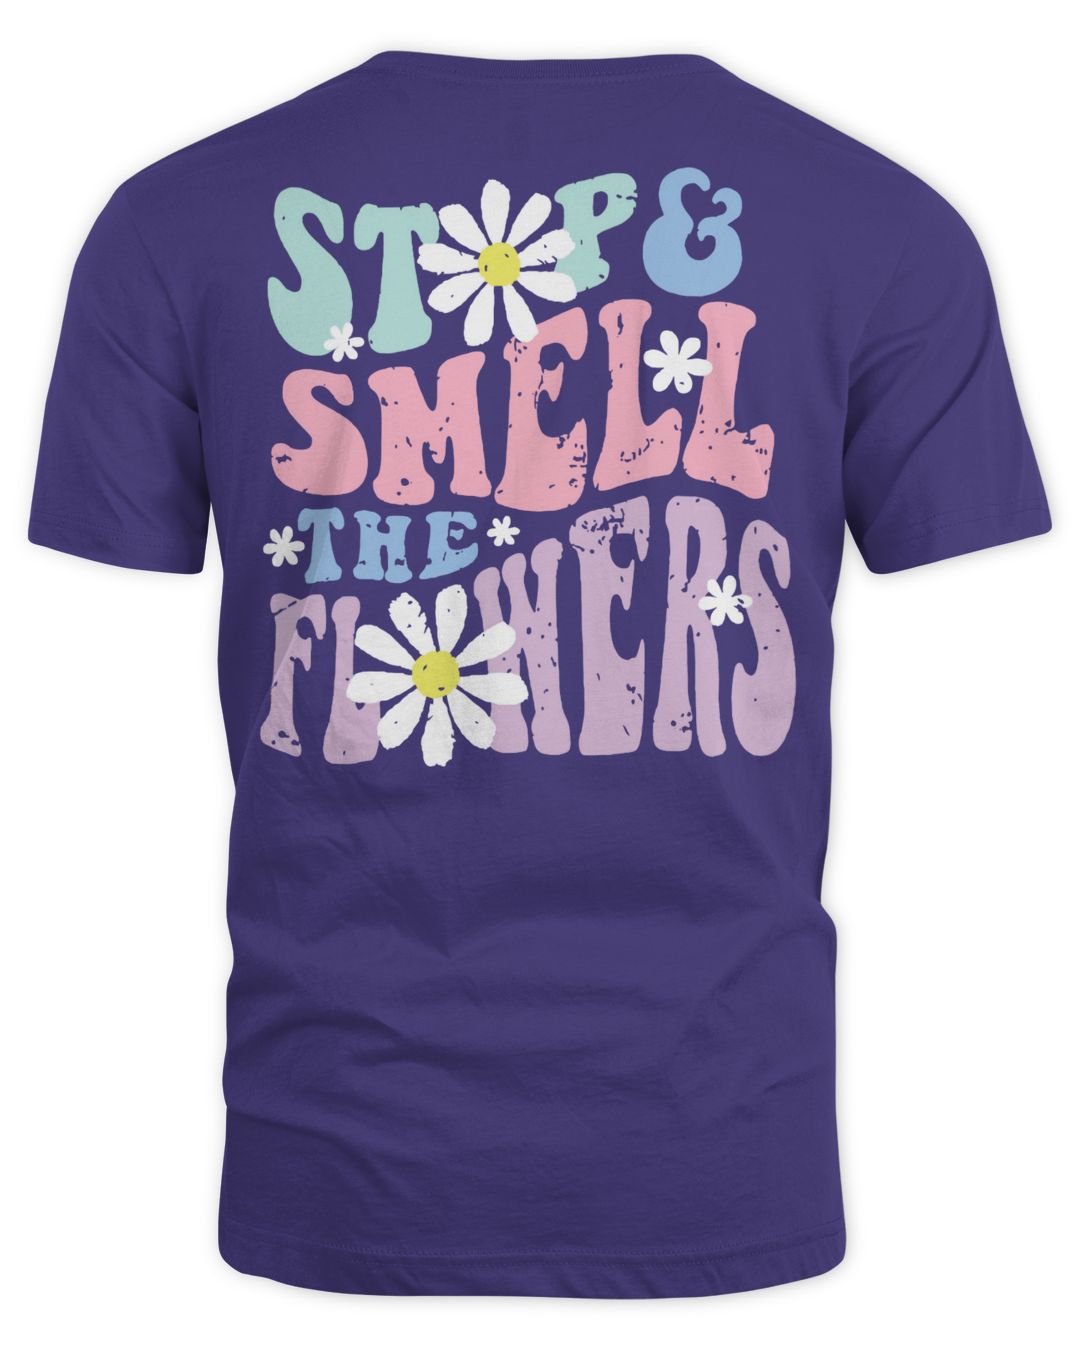 Livingfully Merch Stop & Smell the Flowers Shirt